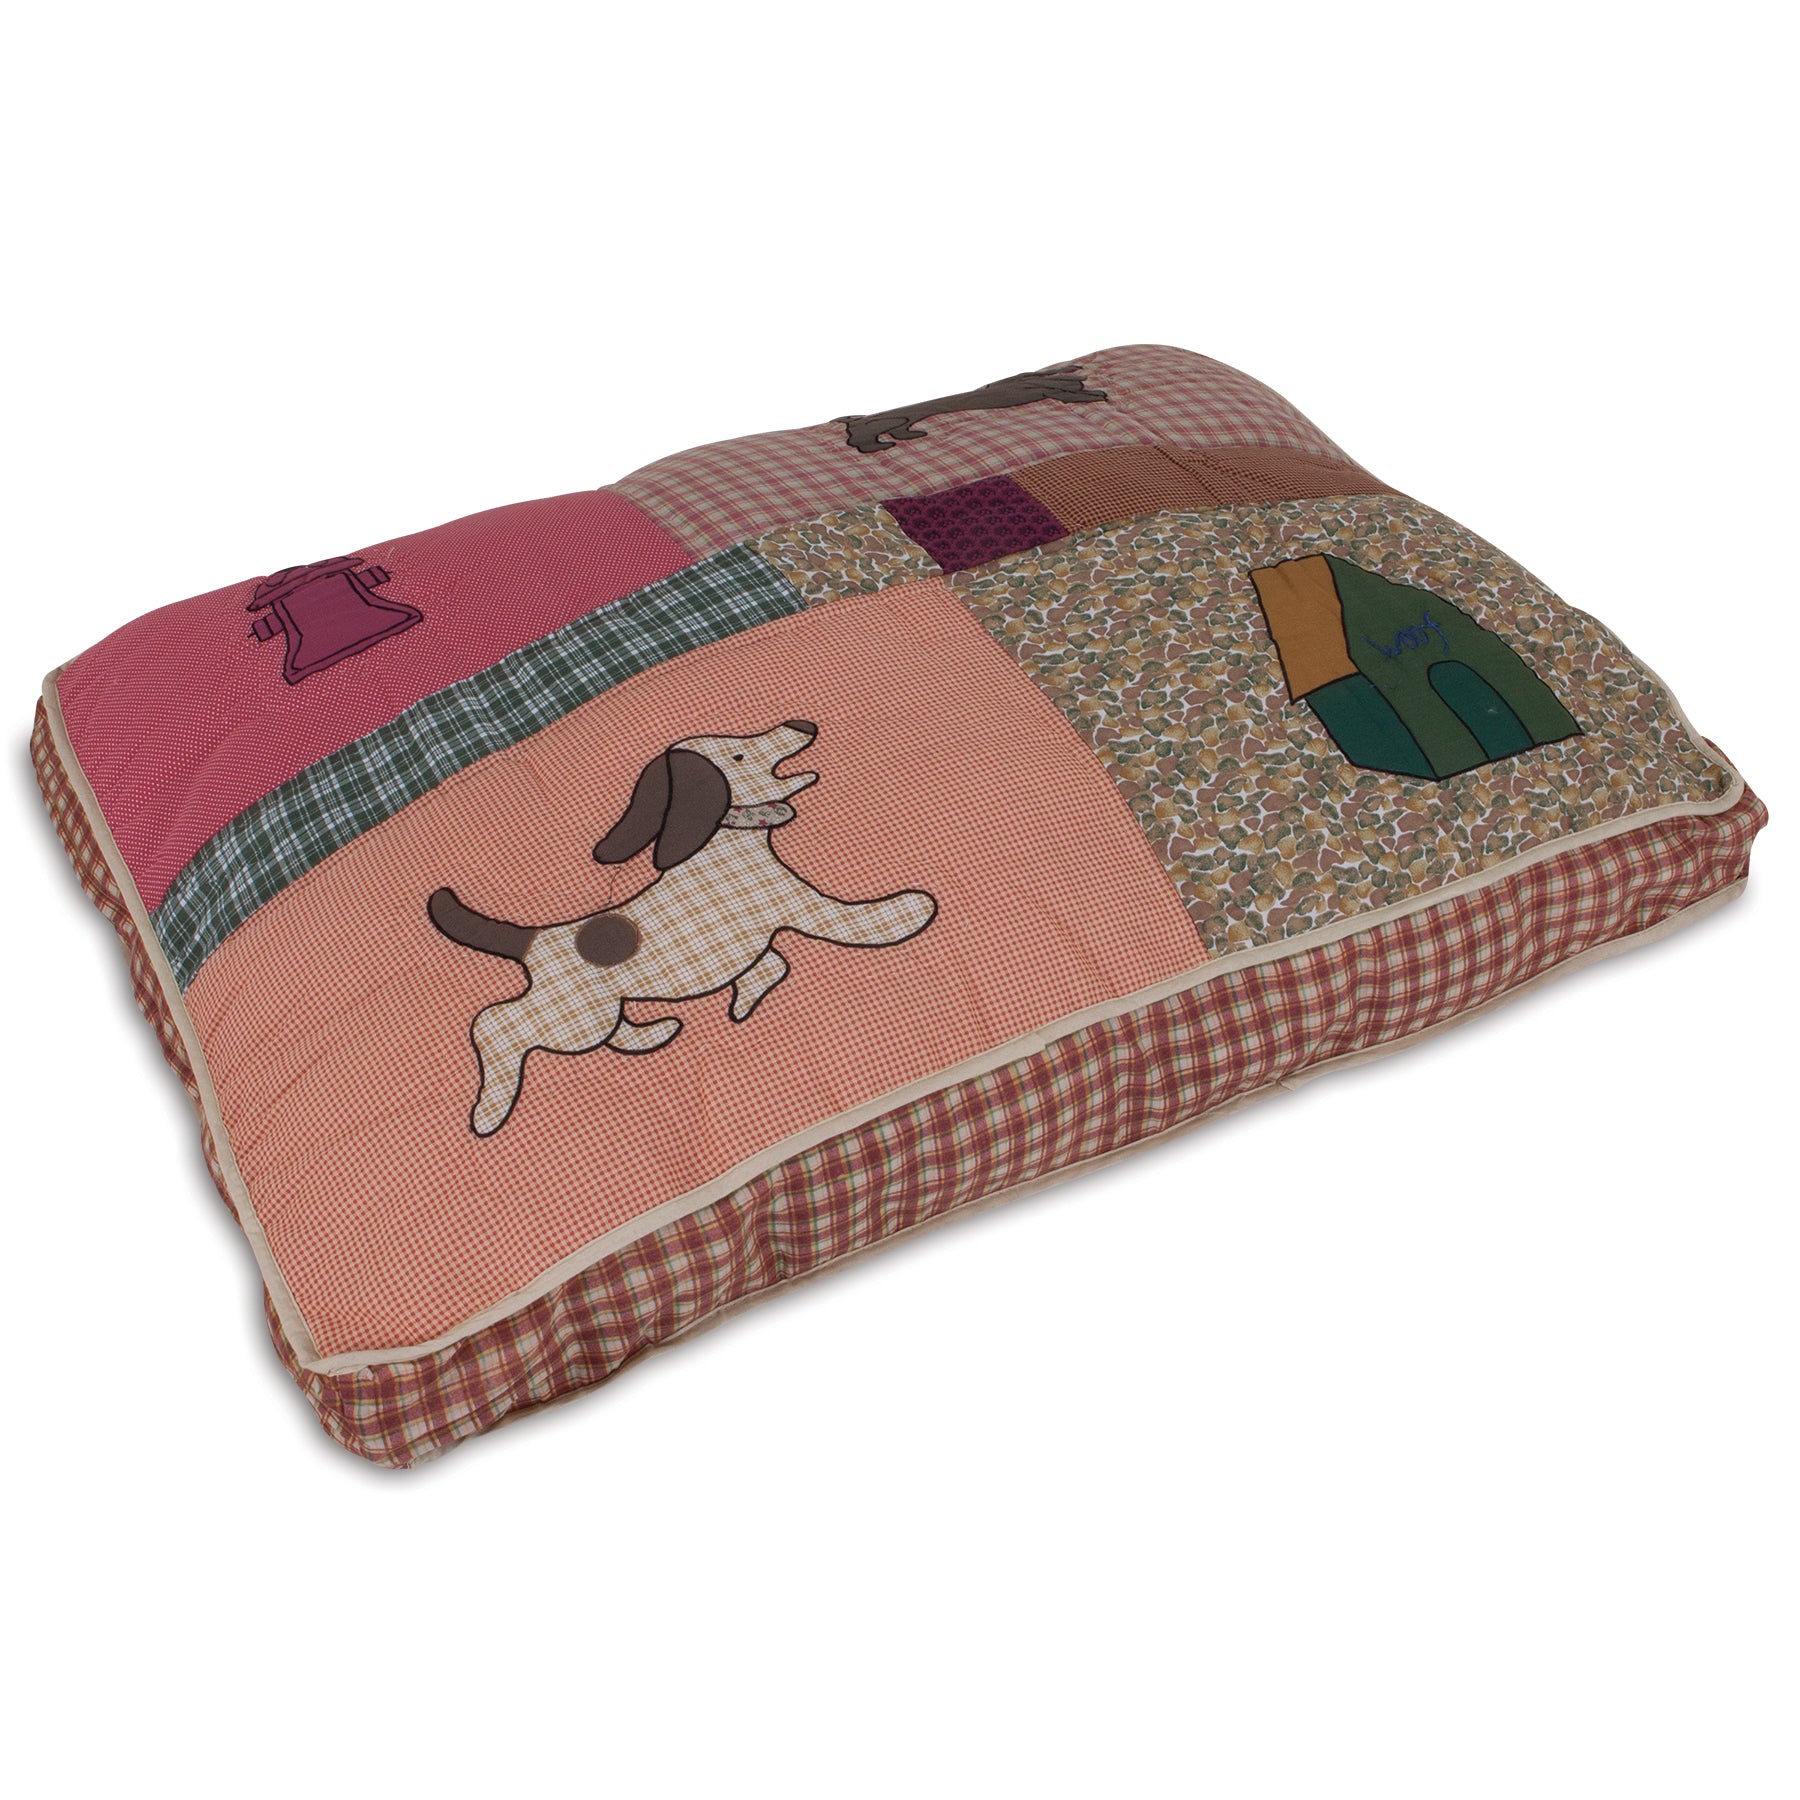 Aspen Pet Quilted Novelty Gusseted Bed